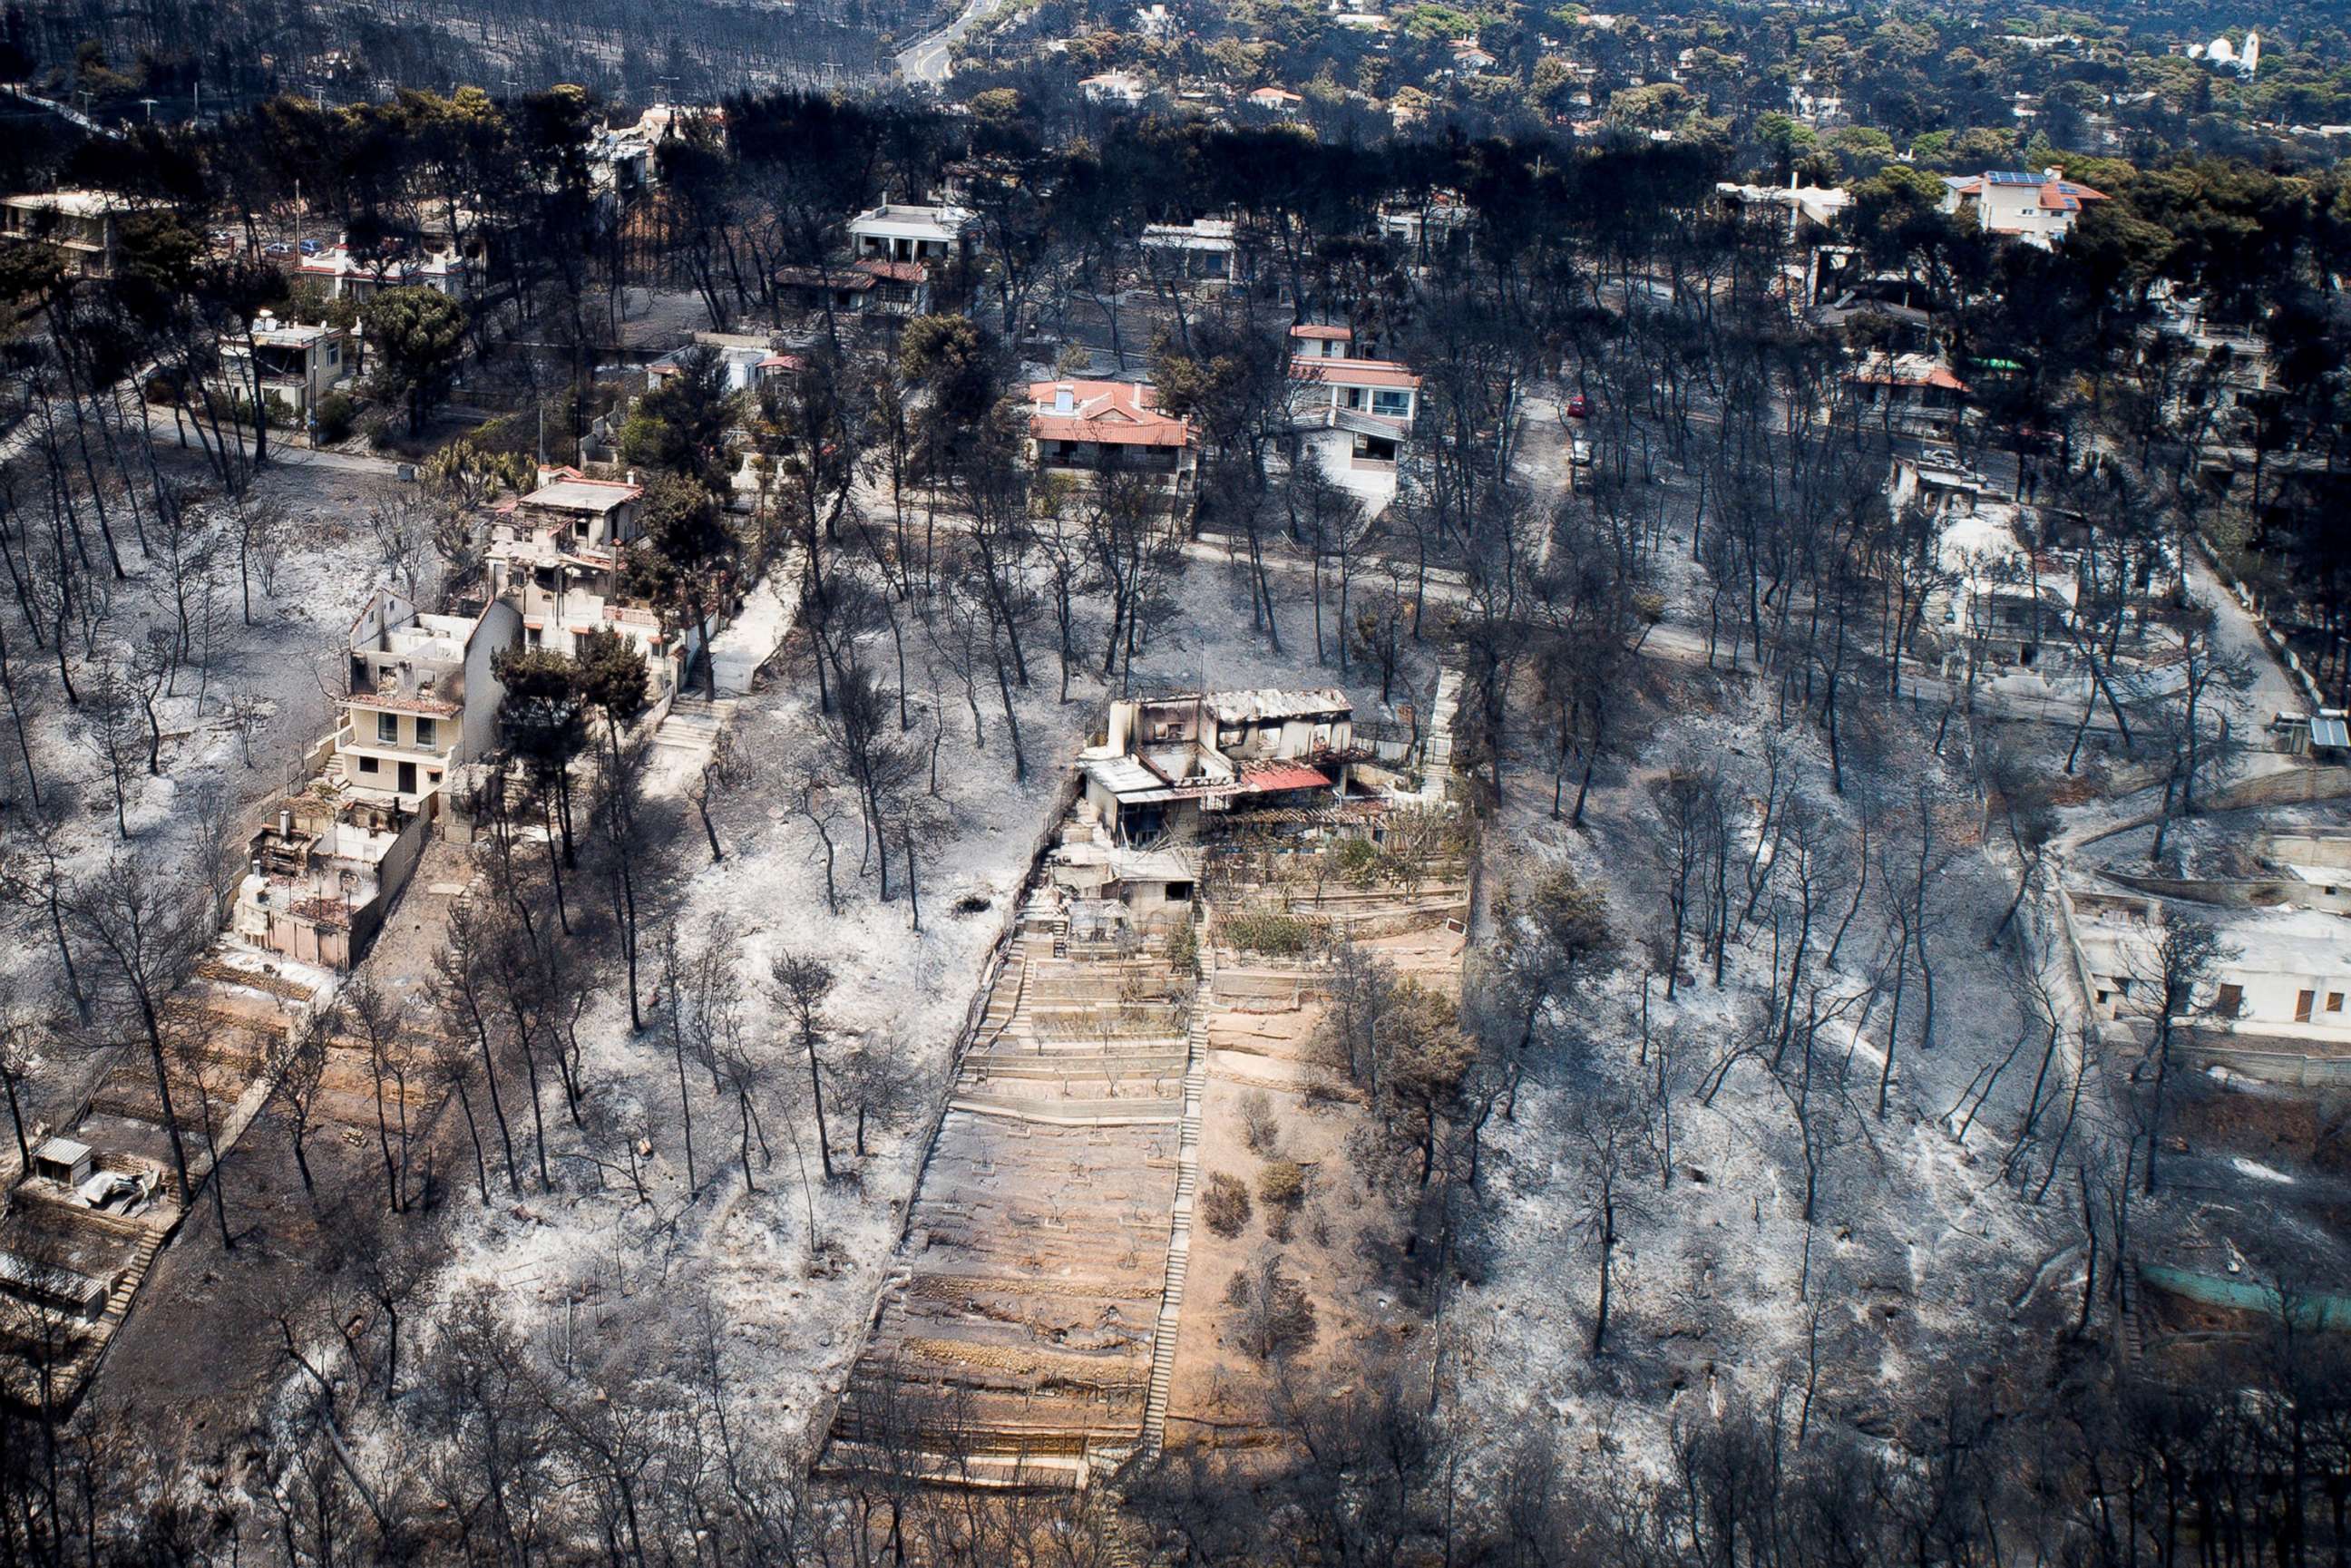 PHOTO: An aerial view shows burnt houses and trees following a wildfire in the village of Mati, near Athens, Greece, July 25, 2018.